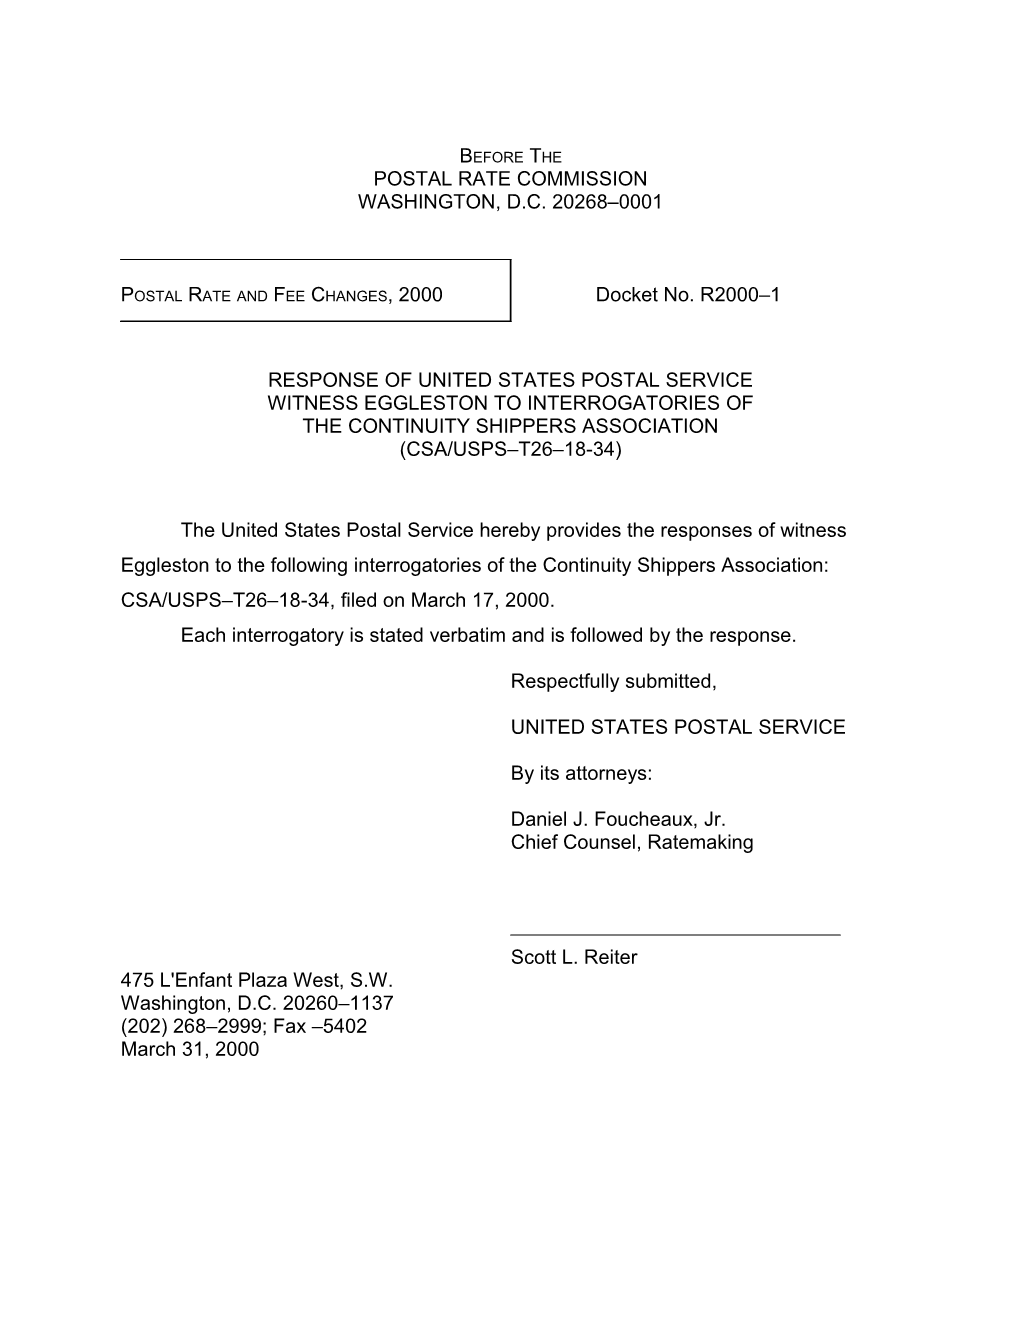 Response of United Postal Service Witness Eggleston to Interrogatories of Continuity Shippers